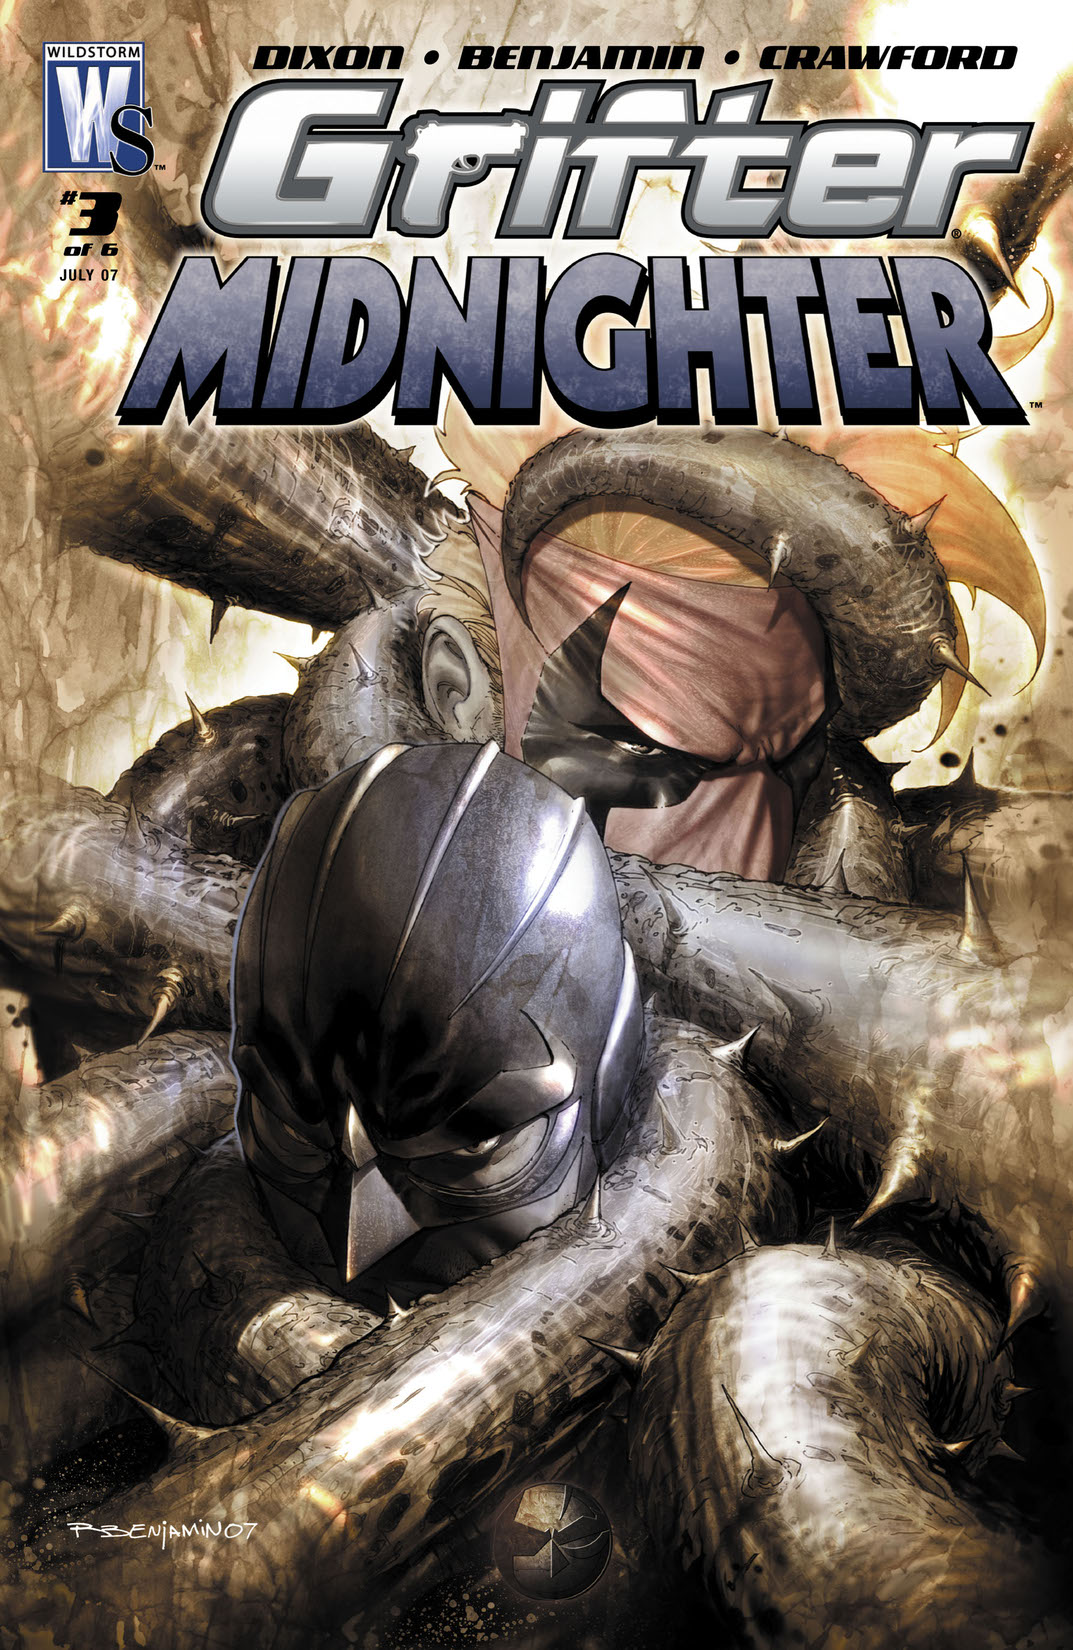 Grifter & Midnighter #3 preview images